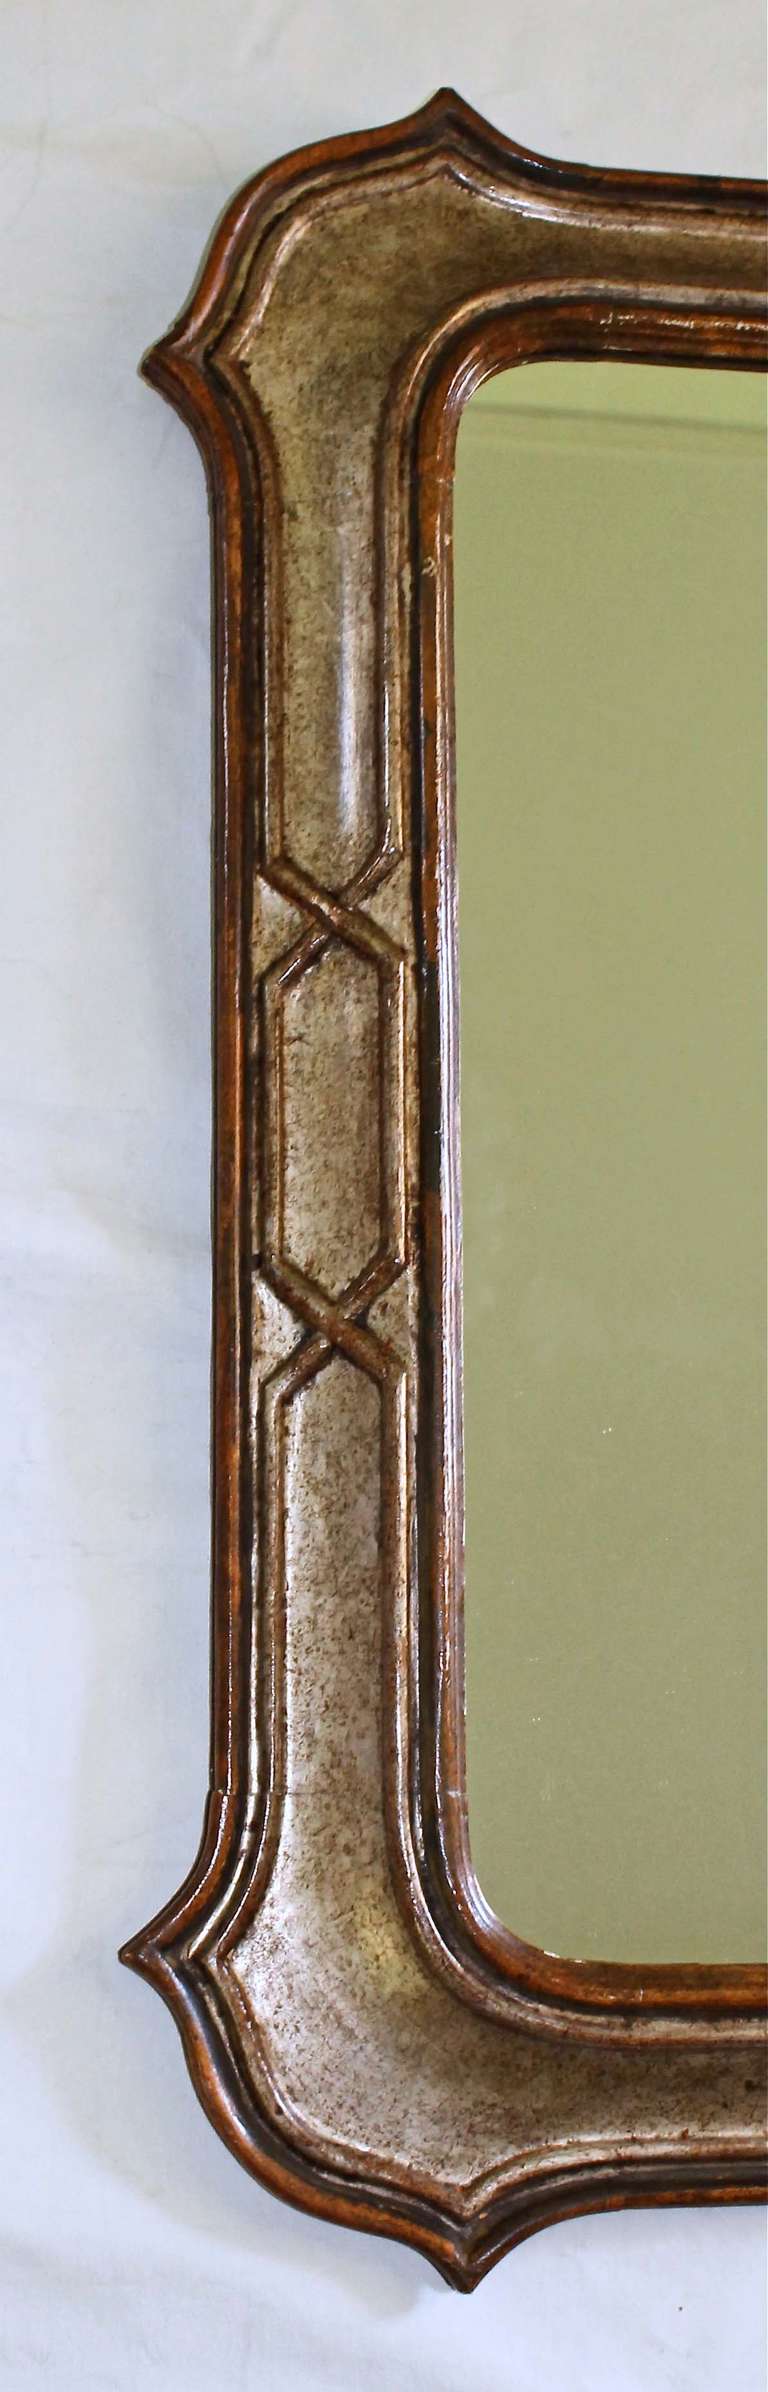 Italian Silver Gilt and Painted Neoclassic Carved Wood Wall Mirror For Sale 3